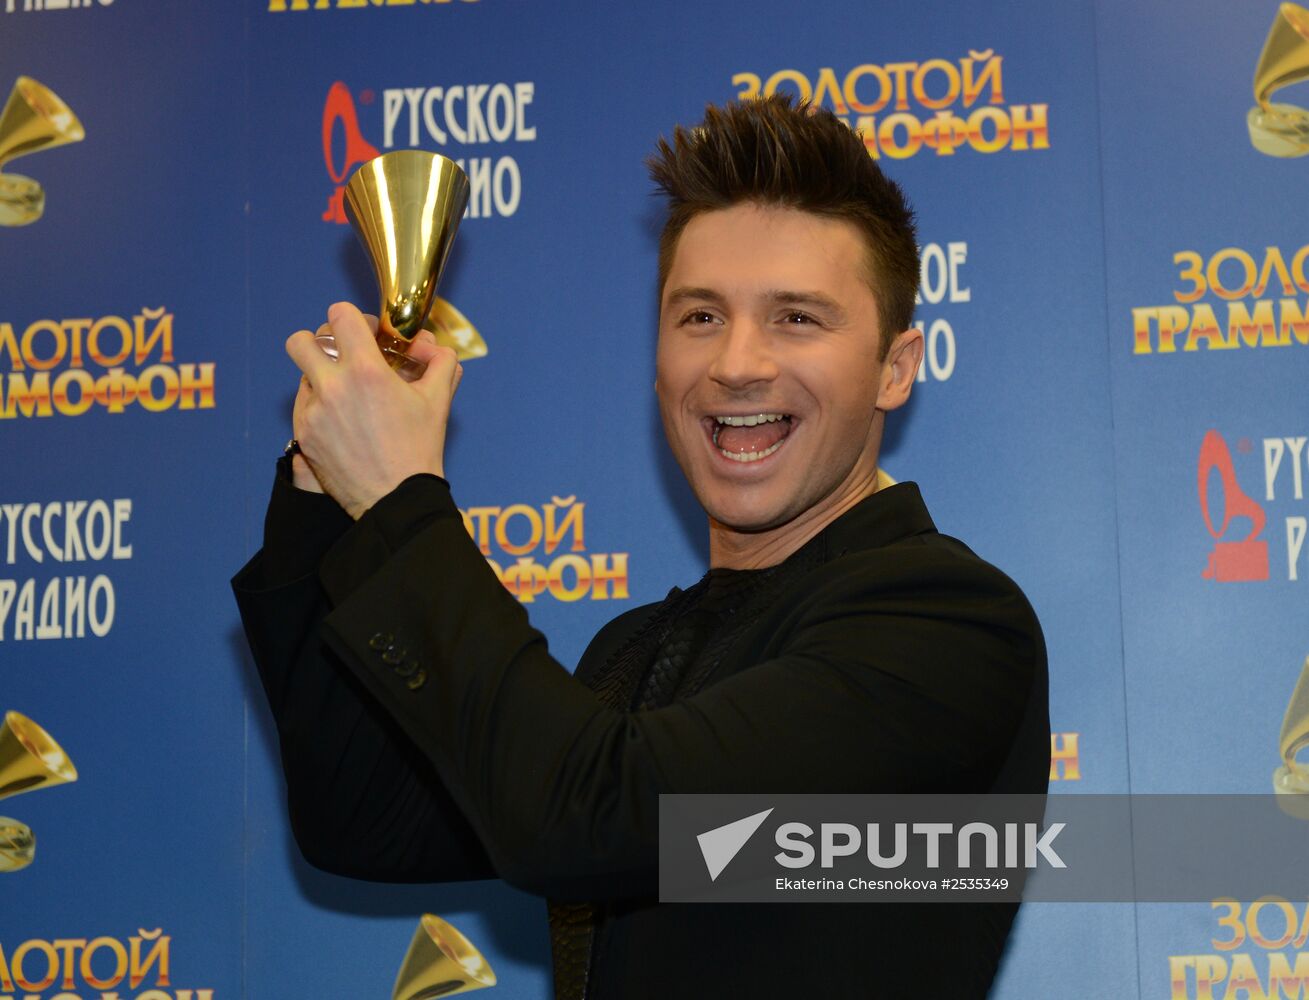 19th Annual Golden Gramophone awards ceremony